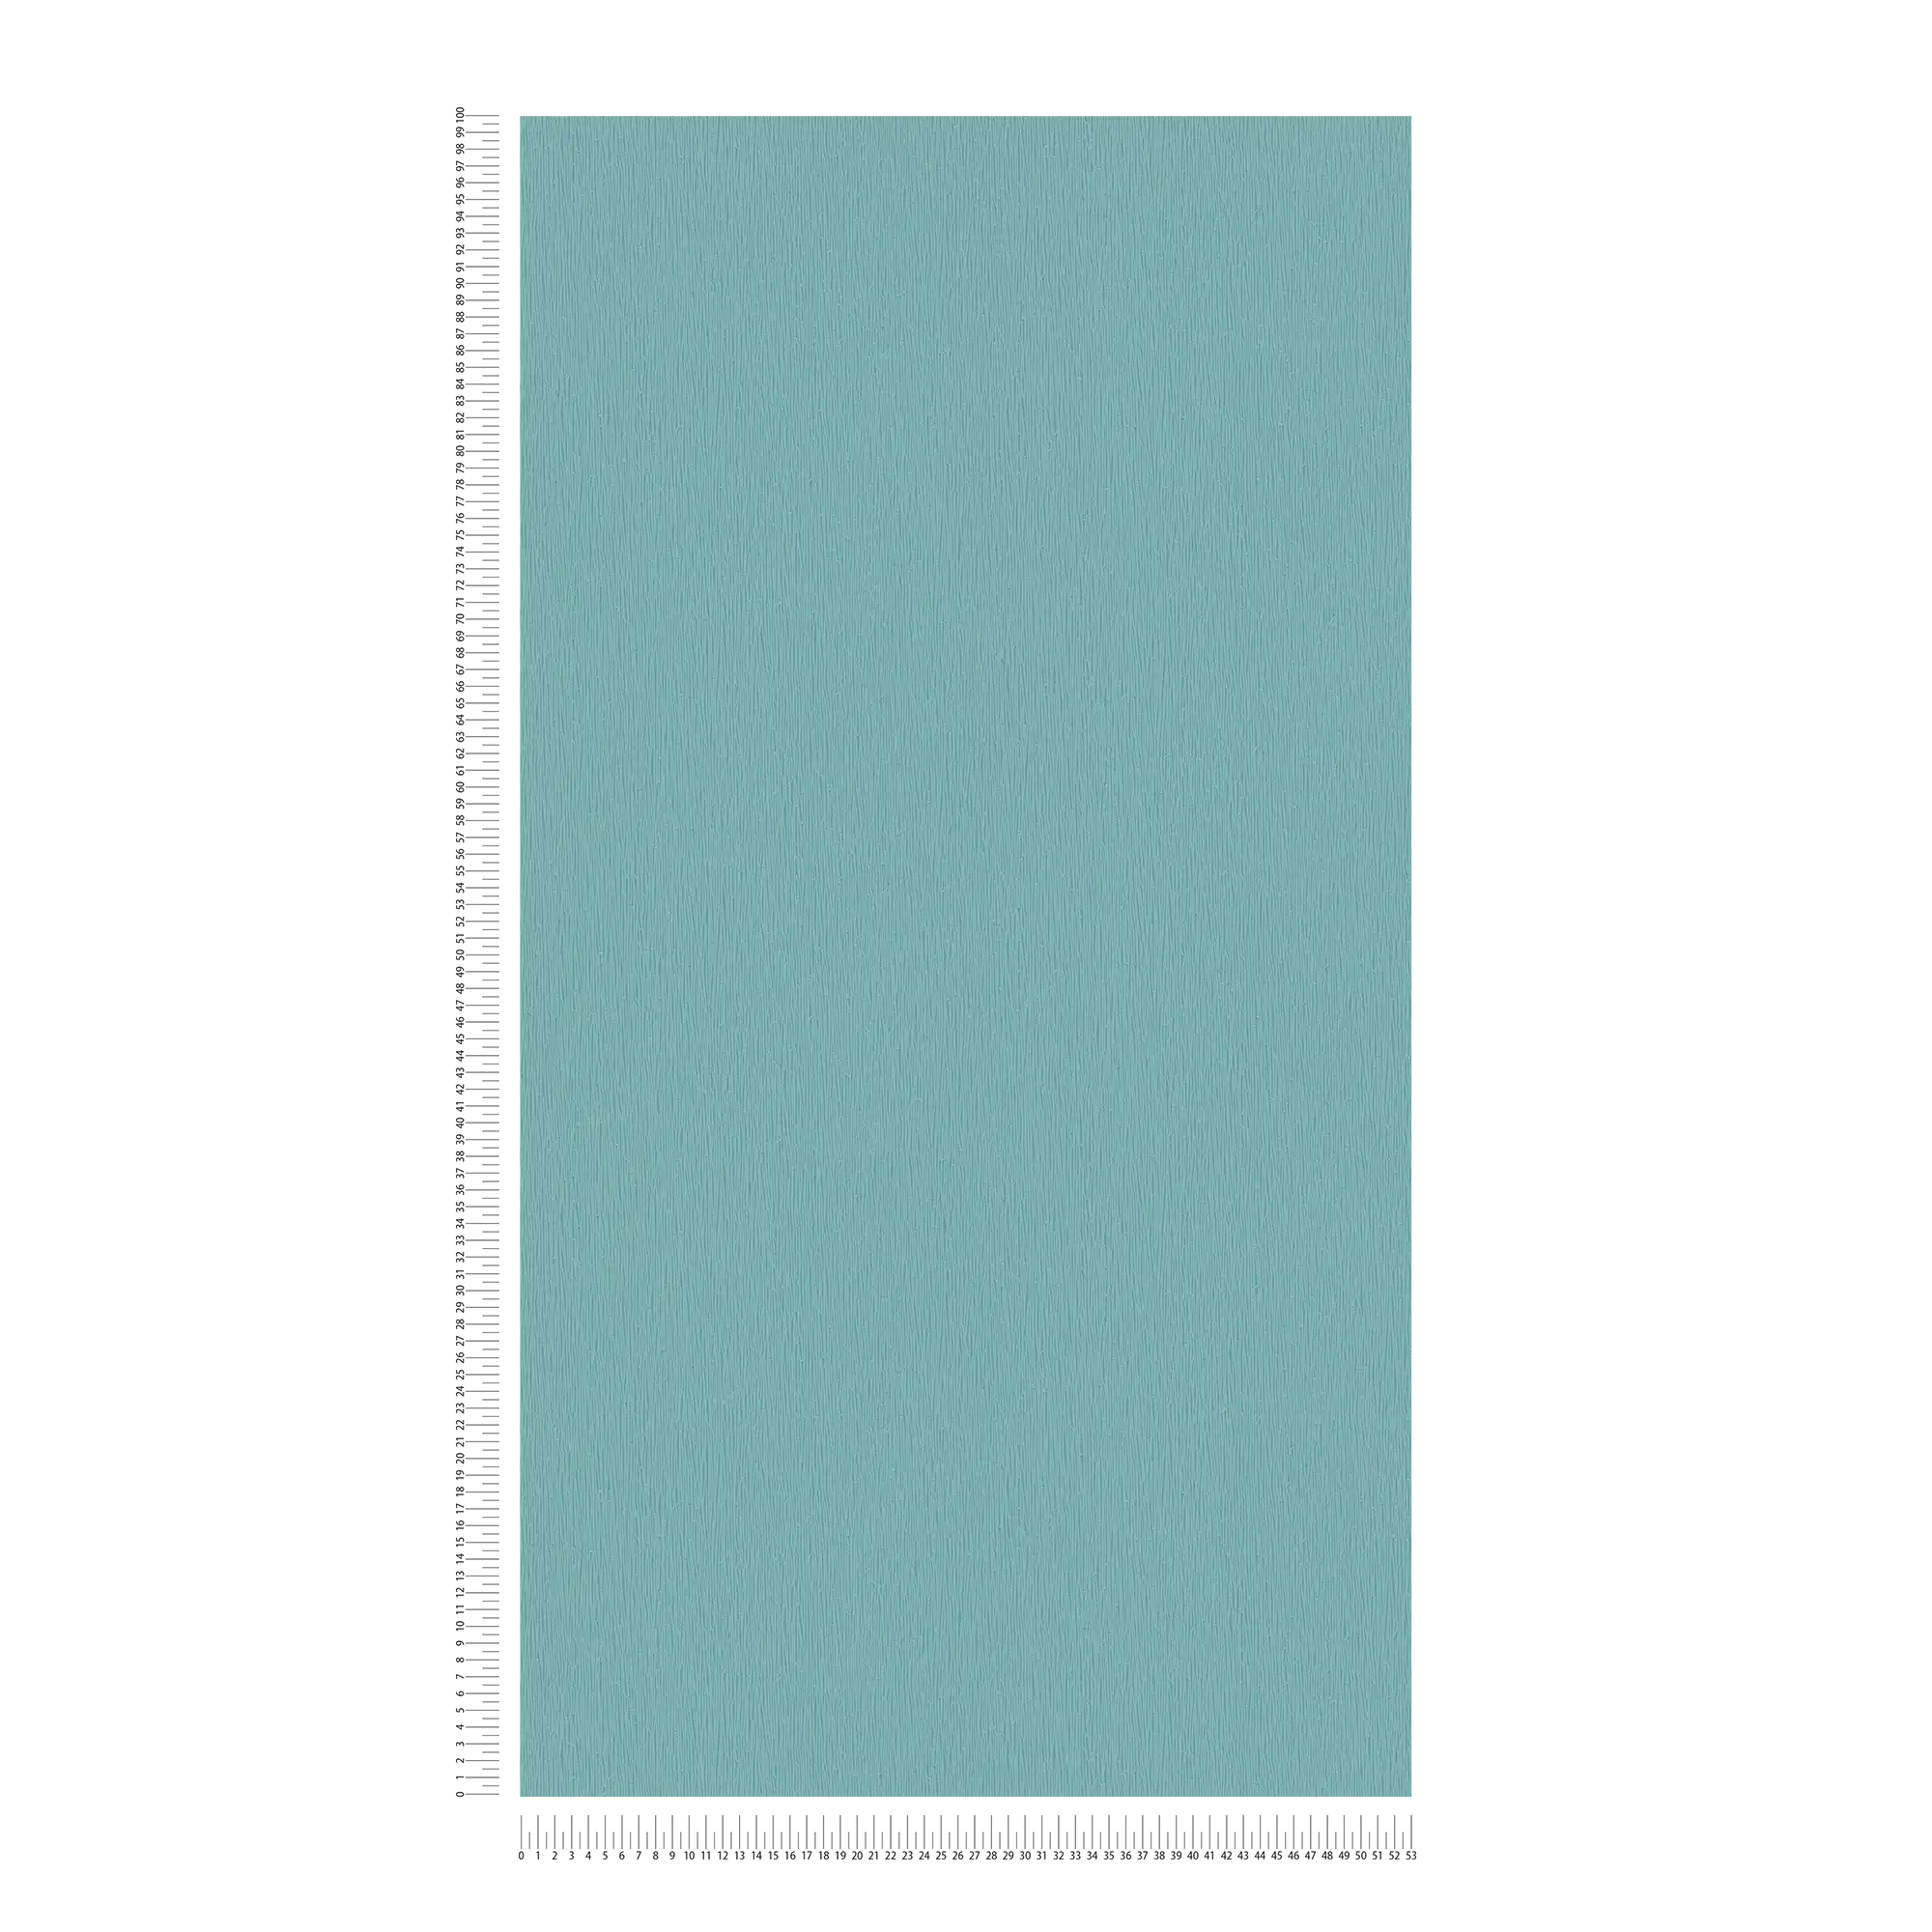             Non-woven wallpaper turquoise with natural tone-on-tone texture pattern - blue, green
        